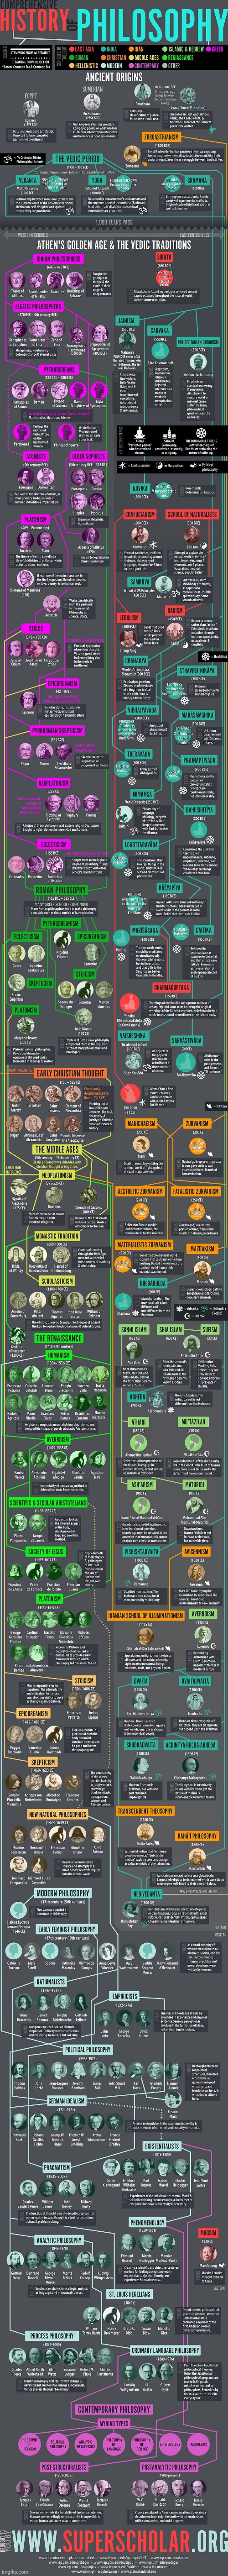 A Comprehensive Infographic On The History Of World Philosophy - Repost By SimoTheFinlandized  - NOT MINE | image tagged in simothefinlandized,philosophy,history,infographic,repost | made w/ Imgflip meme maker